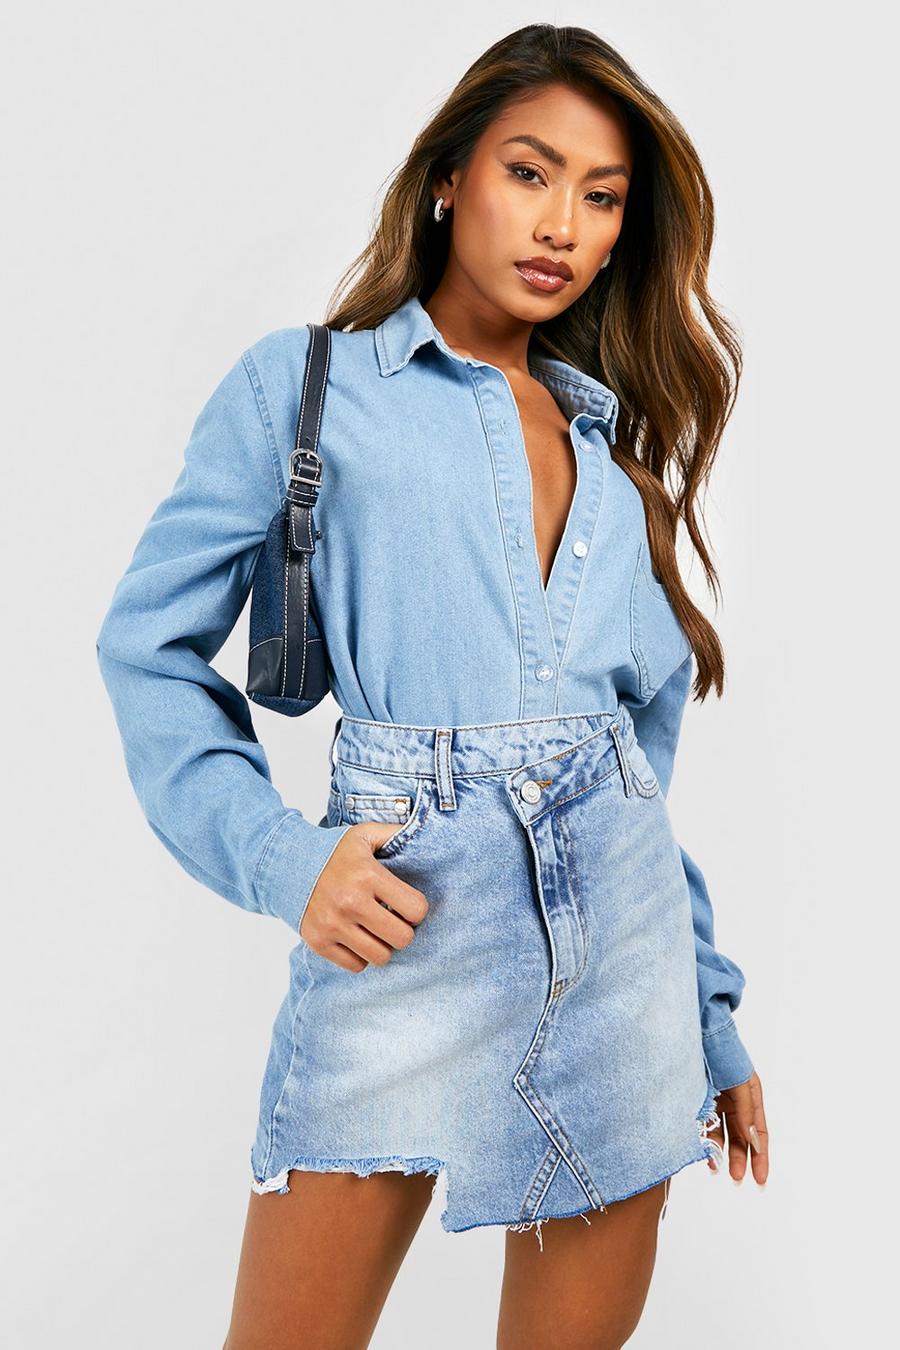 Women's High Waisted Jean Skirt Washed Distressed Split Button Up